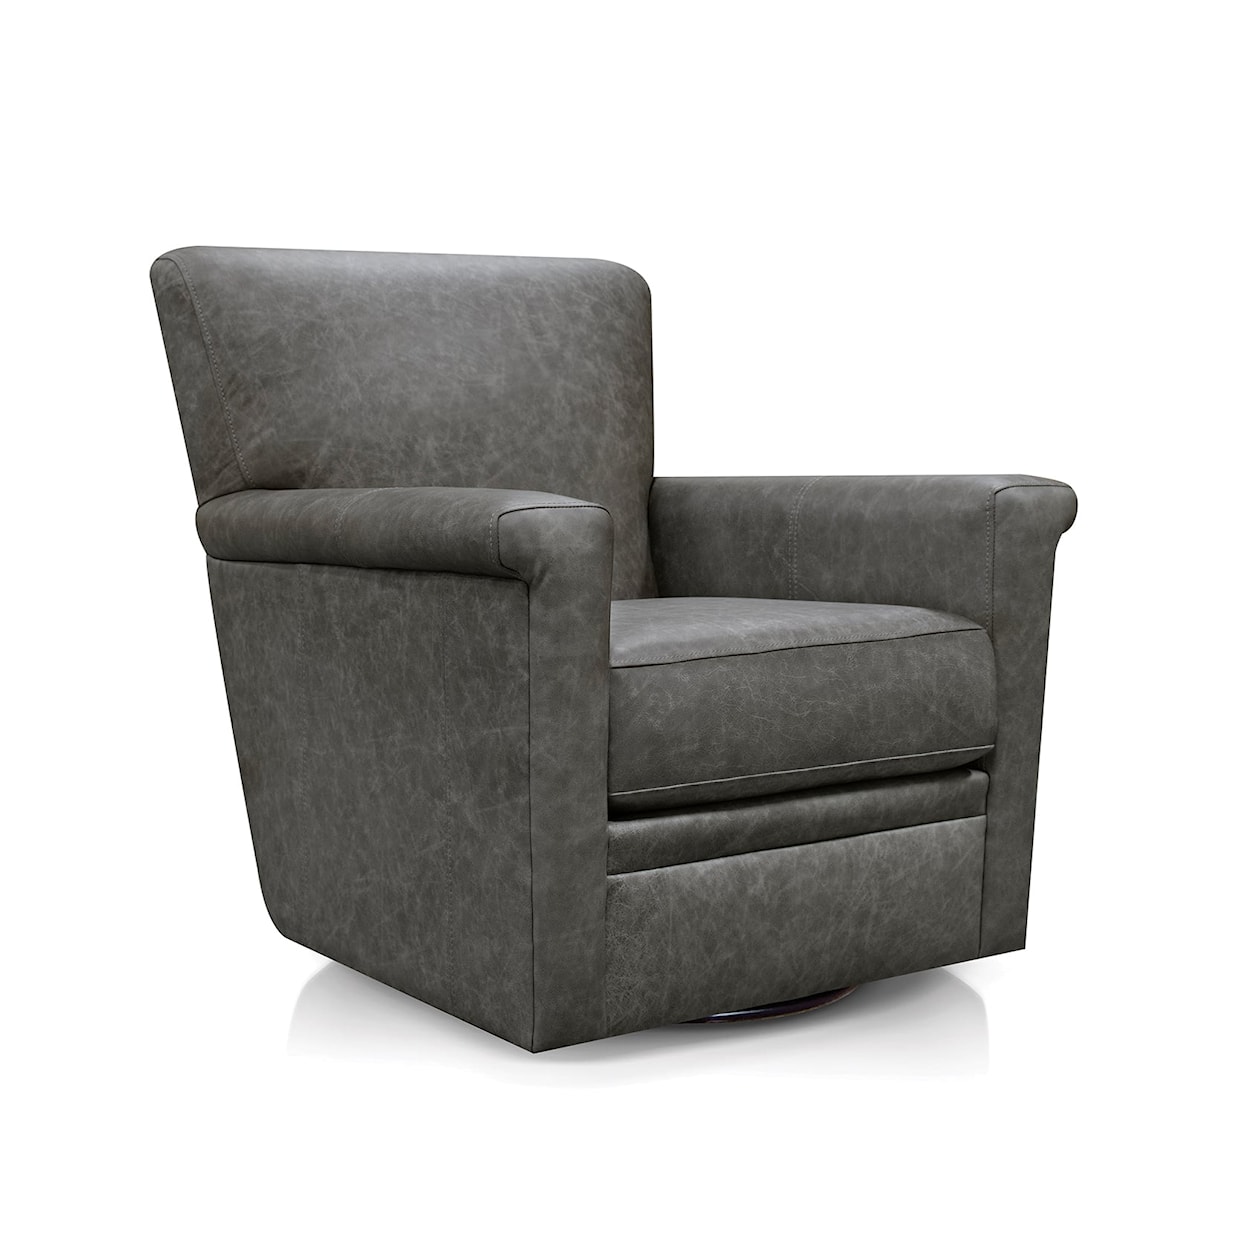 England 3310AL Series Leather Swivel Glider Accent Chair